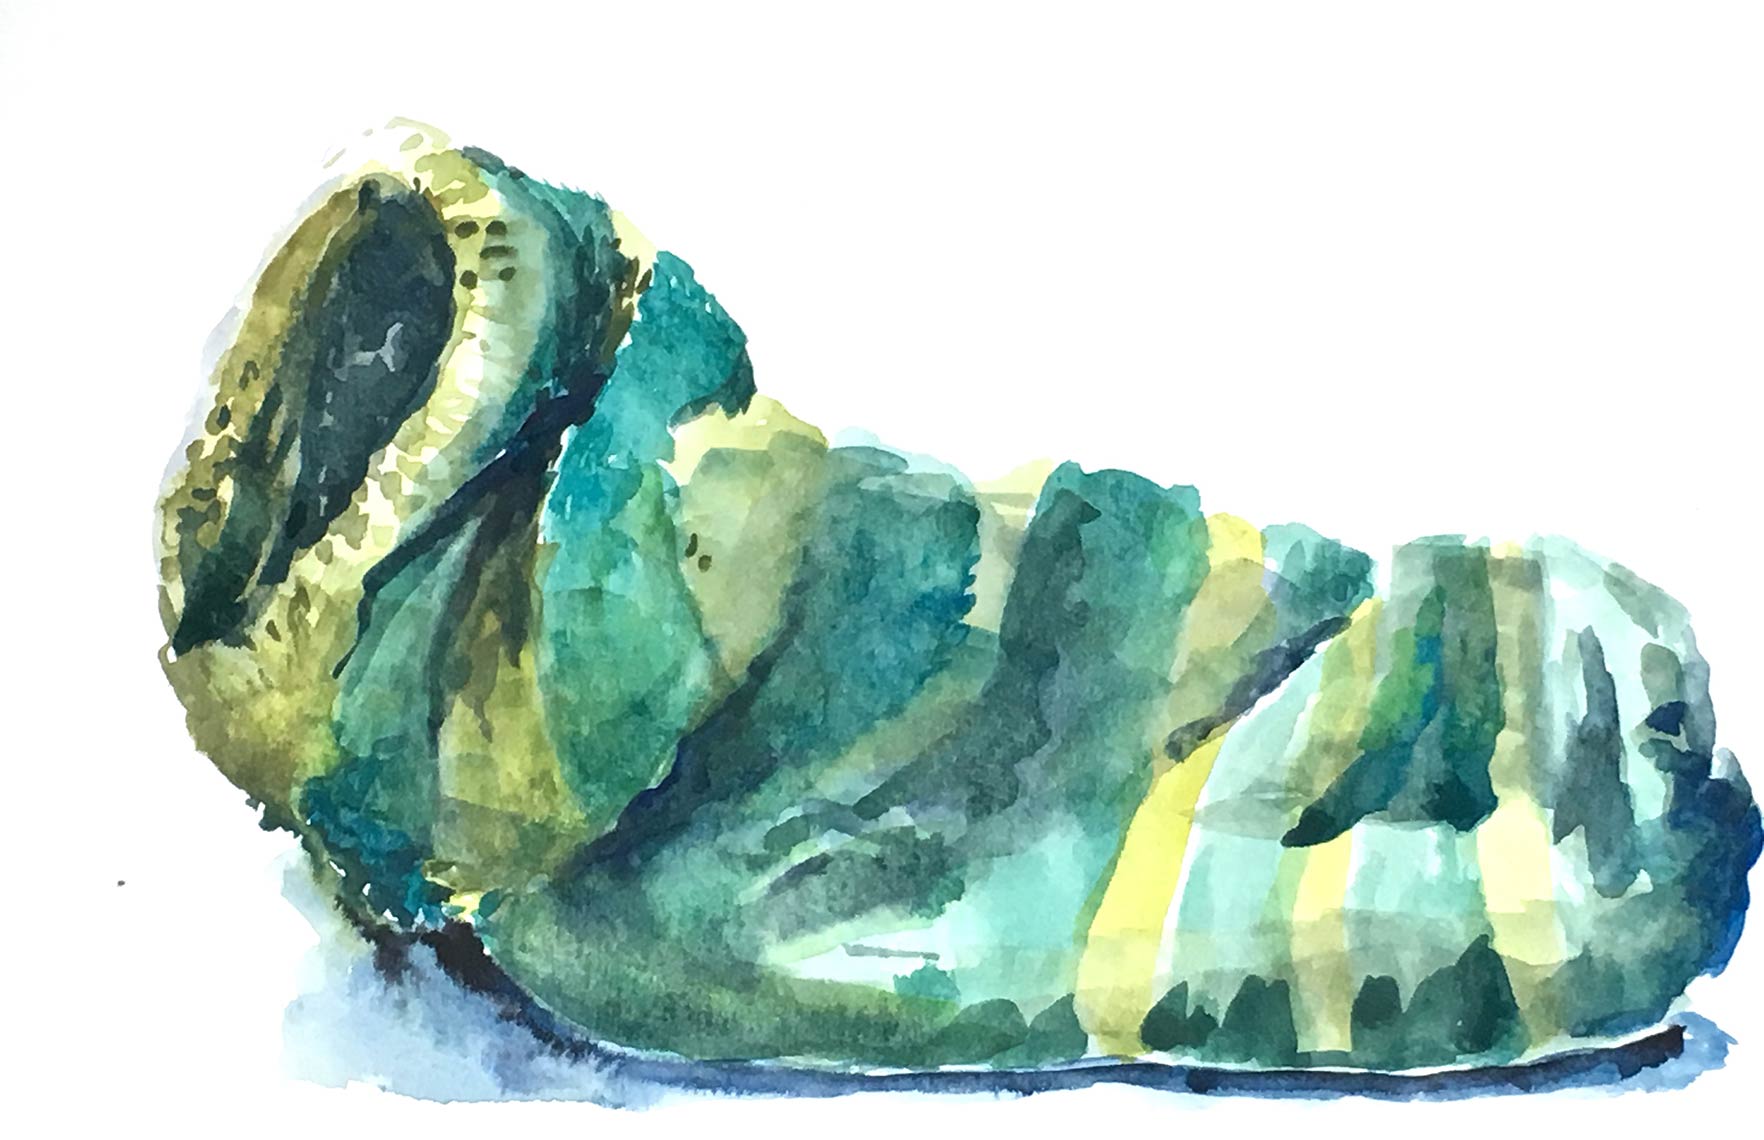 Lost-Sock-Green-Stripped-2016-Watercolor-on-rag-paper-6x10-inches